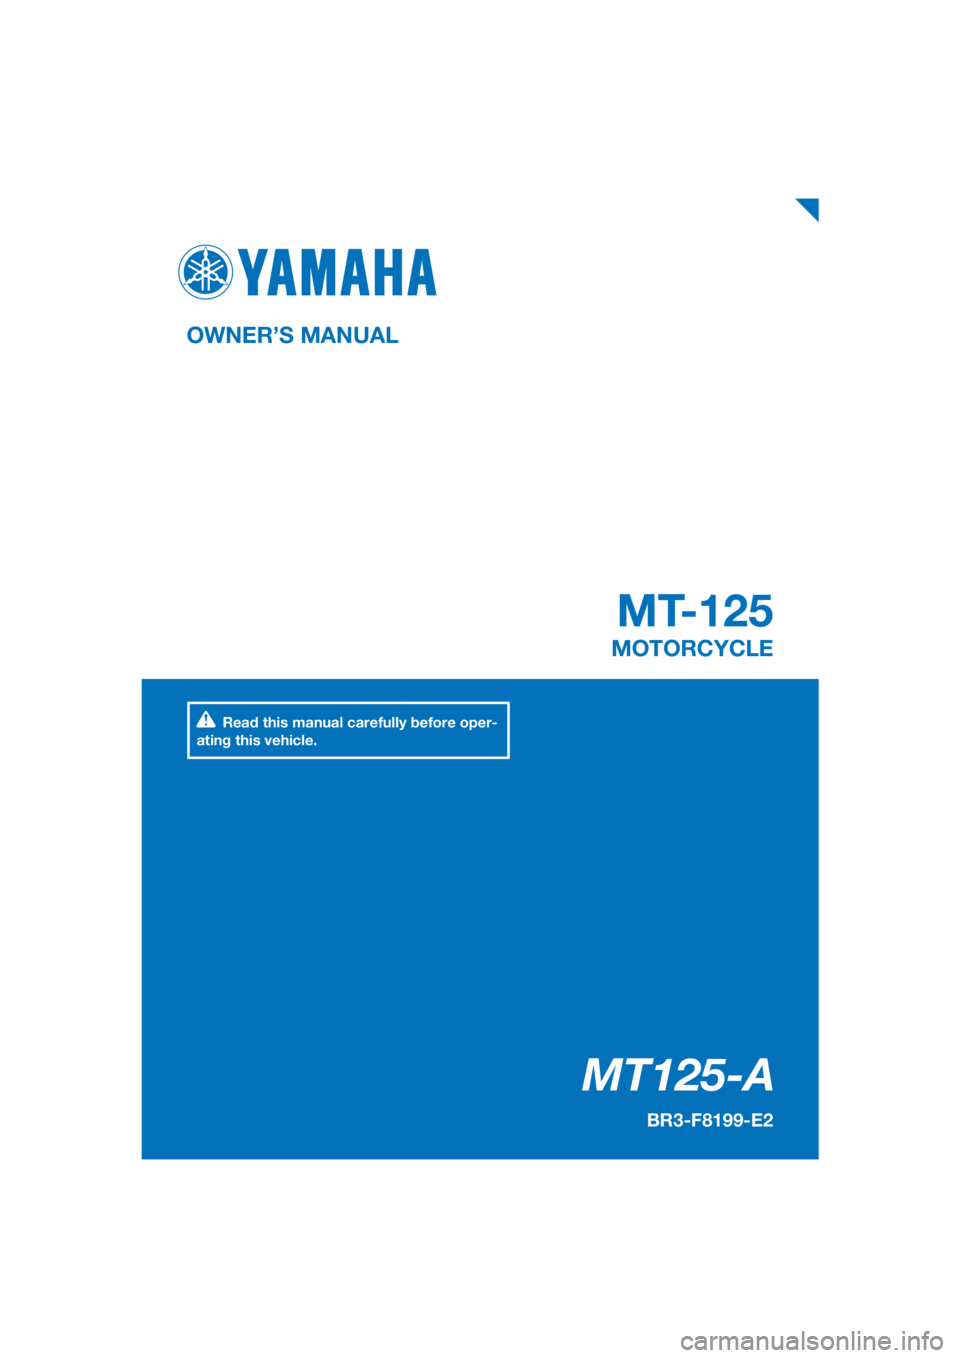 YAMAHA MT-125 2018  Owners Manual PANTONE285C
MT125-A
MT-125
OWNER’S MANUAL
BR3-F8199-E2
MOTORCYCLE
[English  (E)]
Read this manual carefully before oper-
ating this vehicle. 